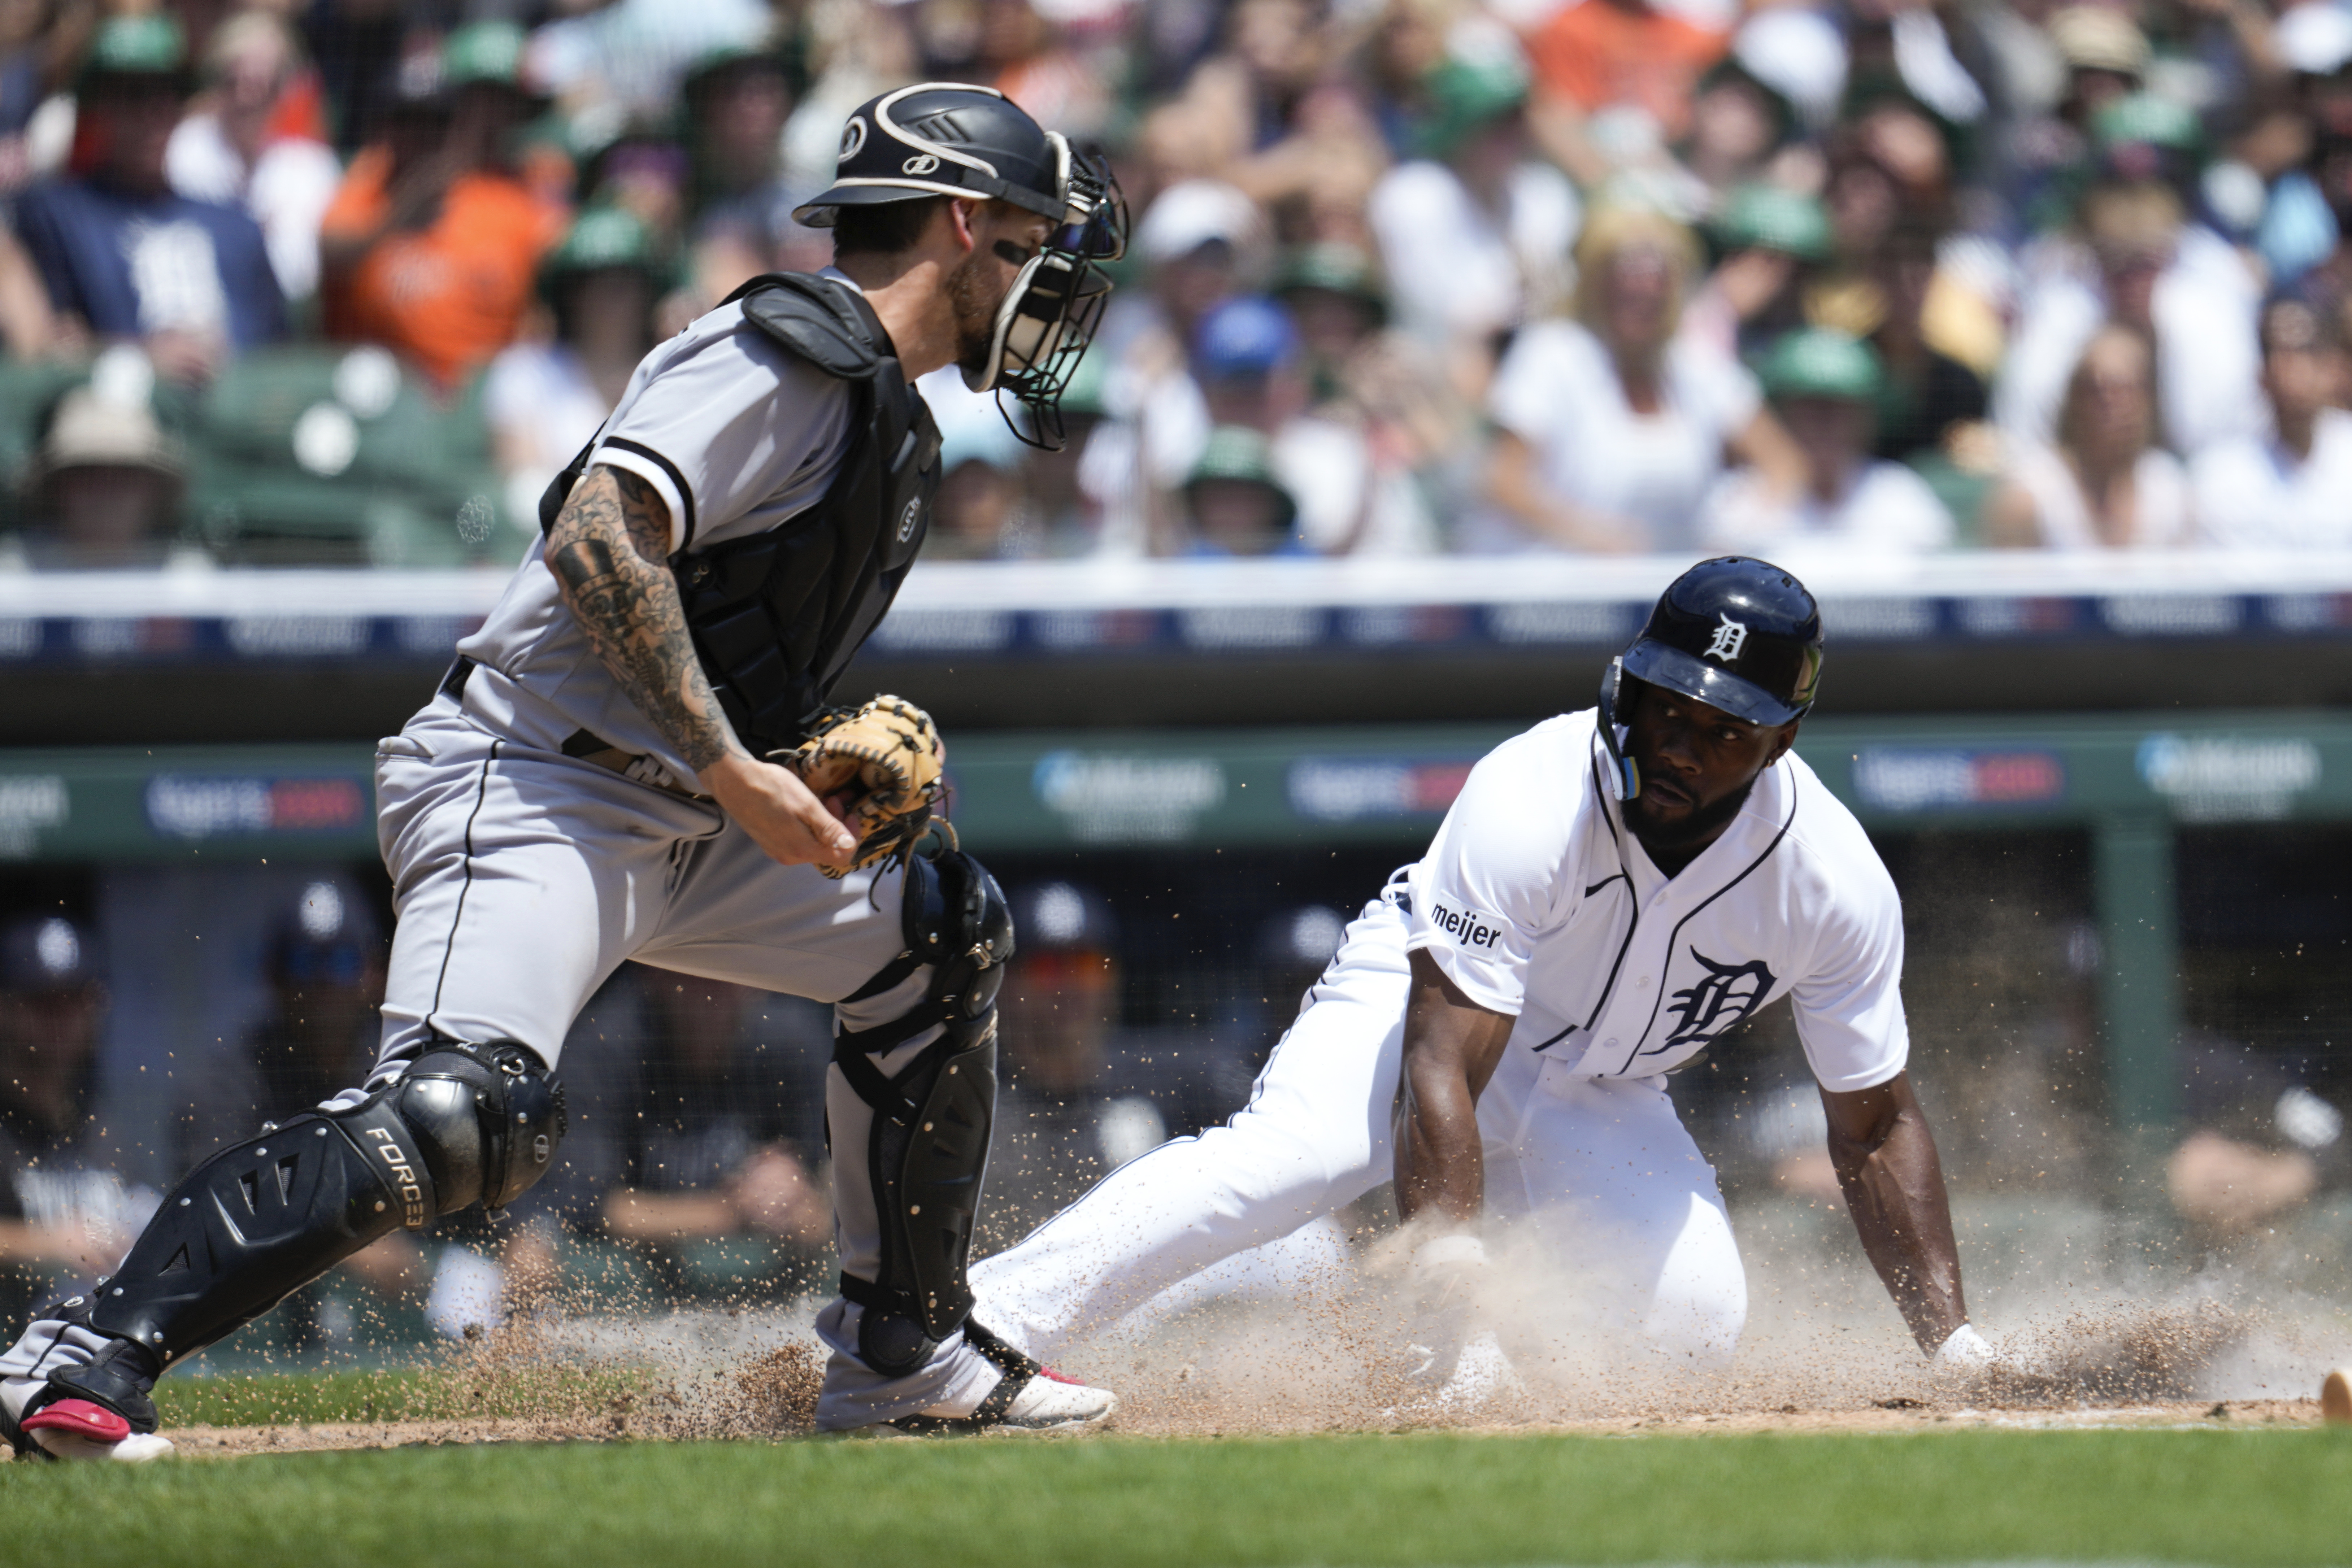 Column: Make this the 1-2 order in Chicago White Sox lineup